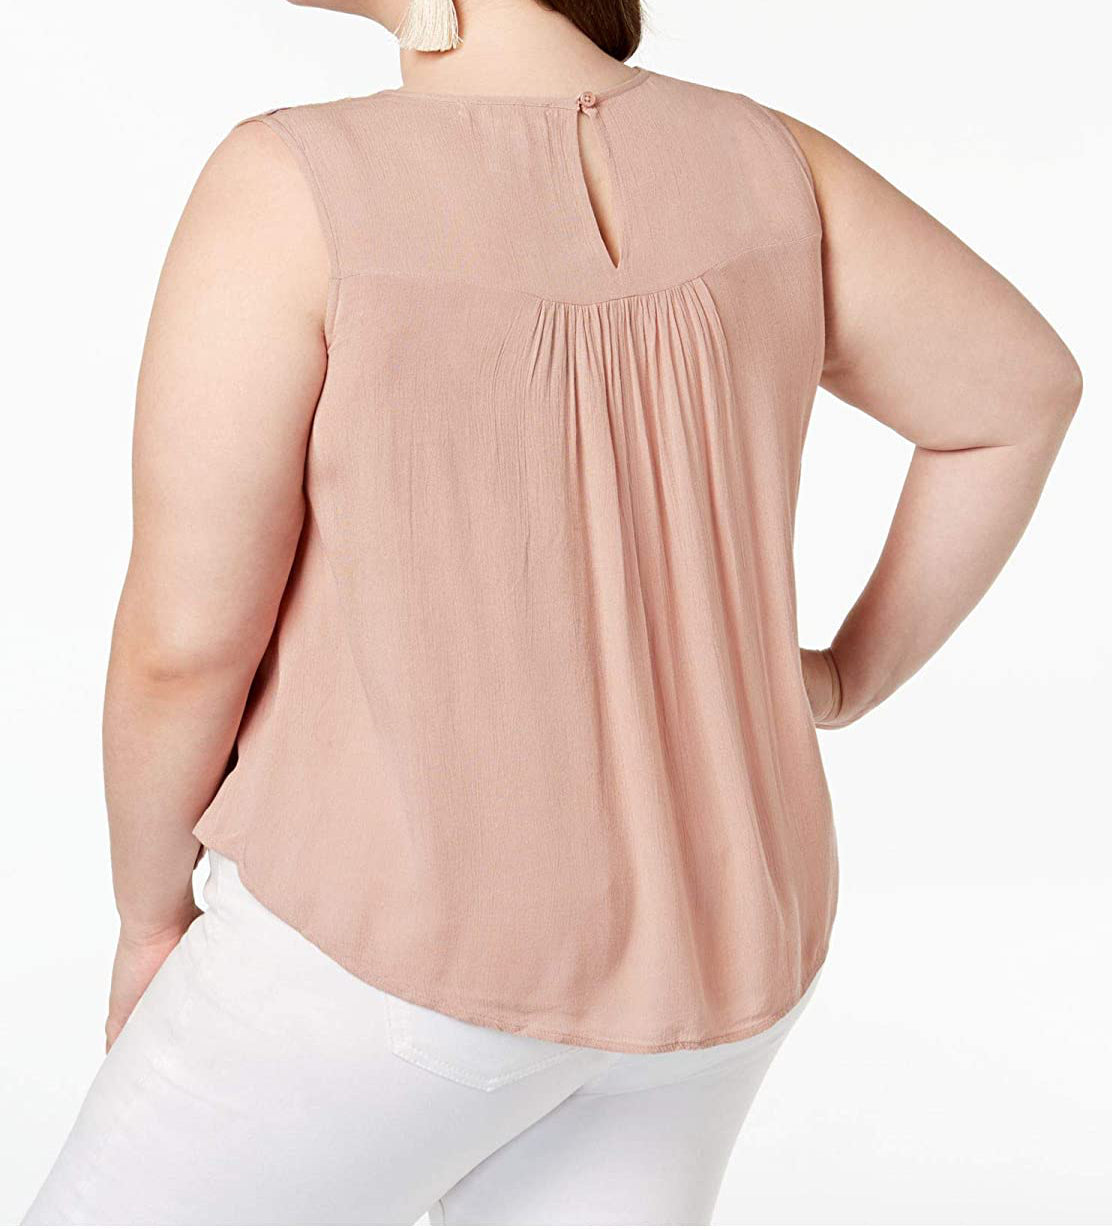 Planet Gold Womens Plus Size Embroidered Top